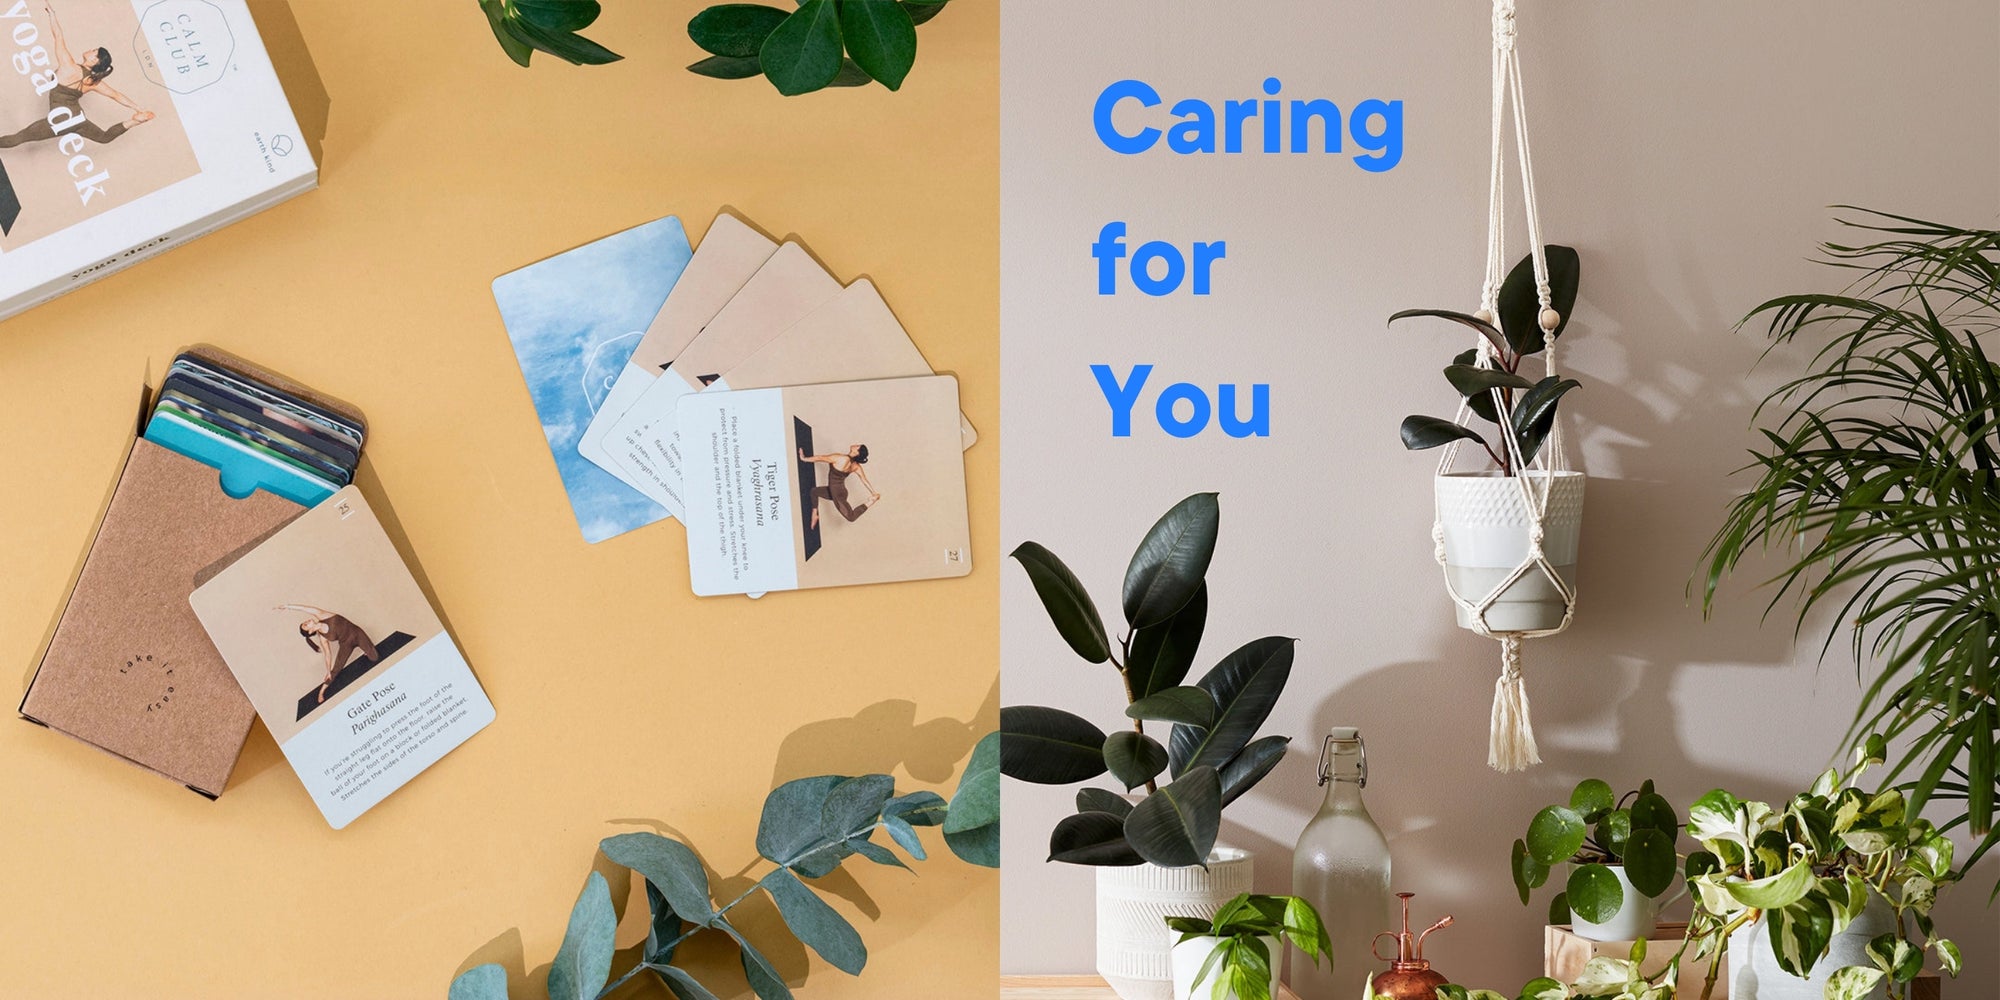 A Yoga deck of cards and a hanging plant-pot macrame kit - reminding people to care for themselves with one of our wellbeing activities..